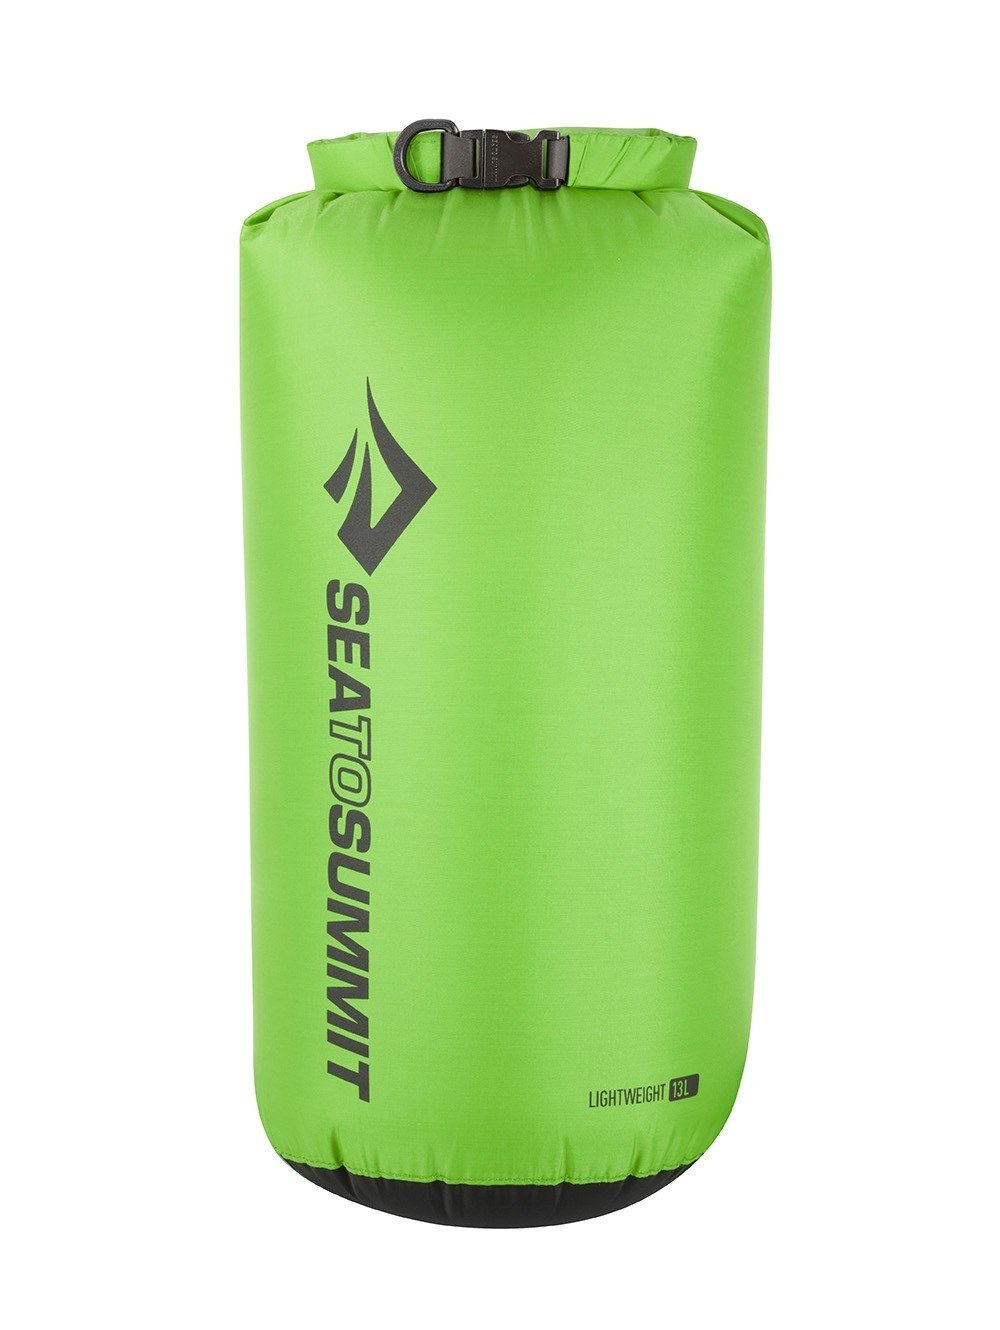 Sea To Summit Lightweight 70D 13 Litres Dry Sack Bags, Packs and Cases Sea To Summit Green Tactical Gear Supplier Tactical Distributors Australia